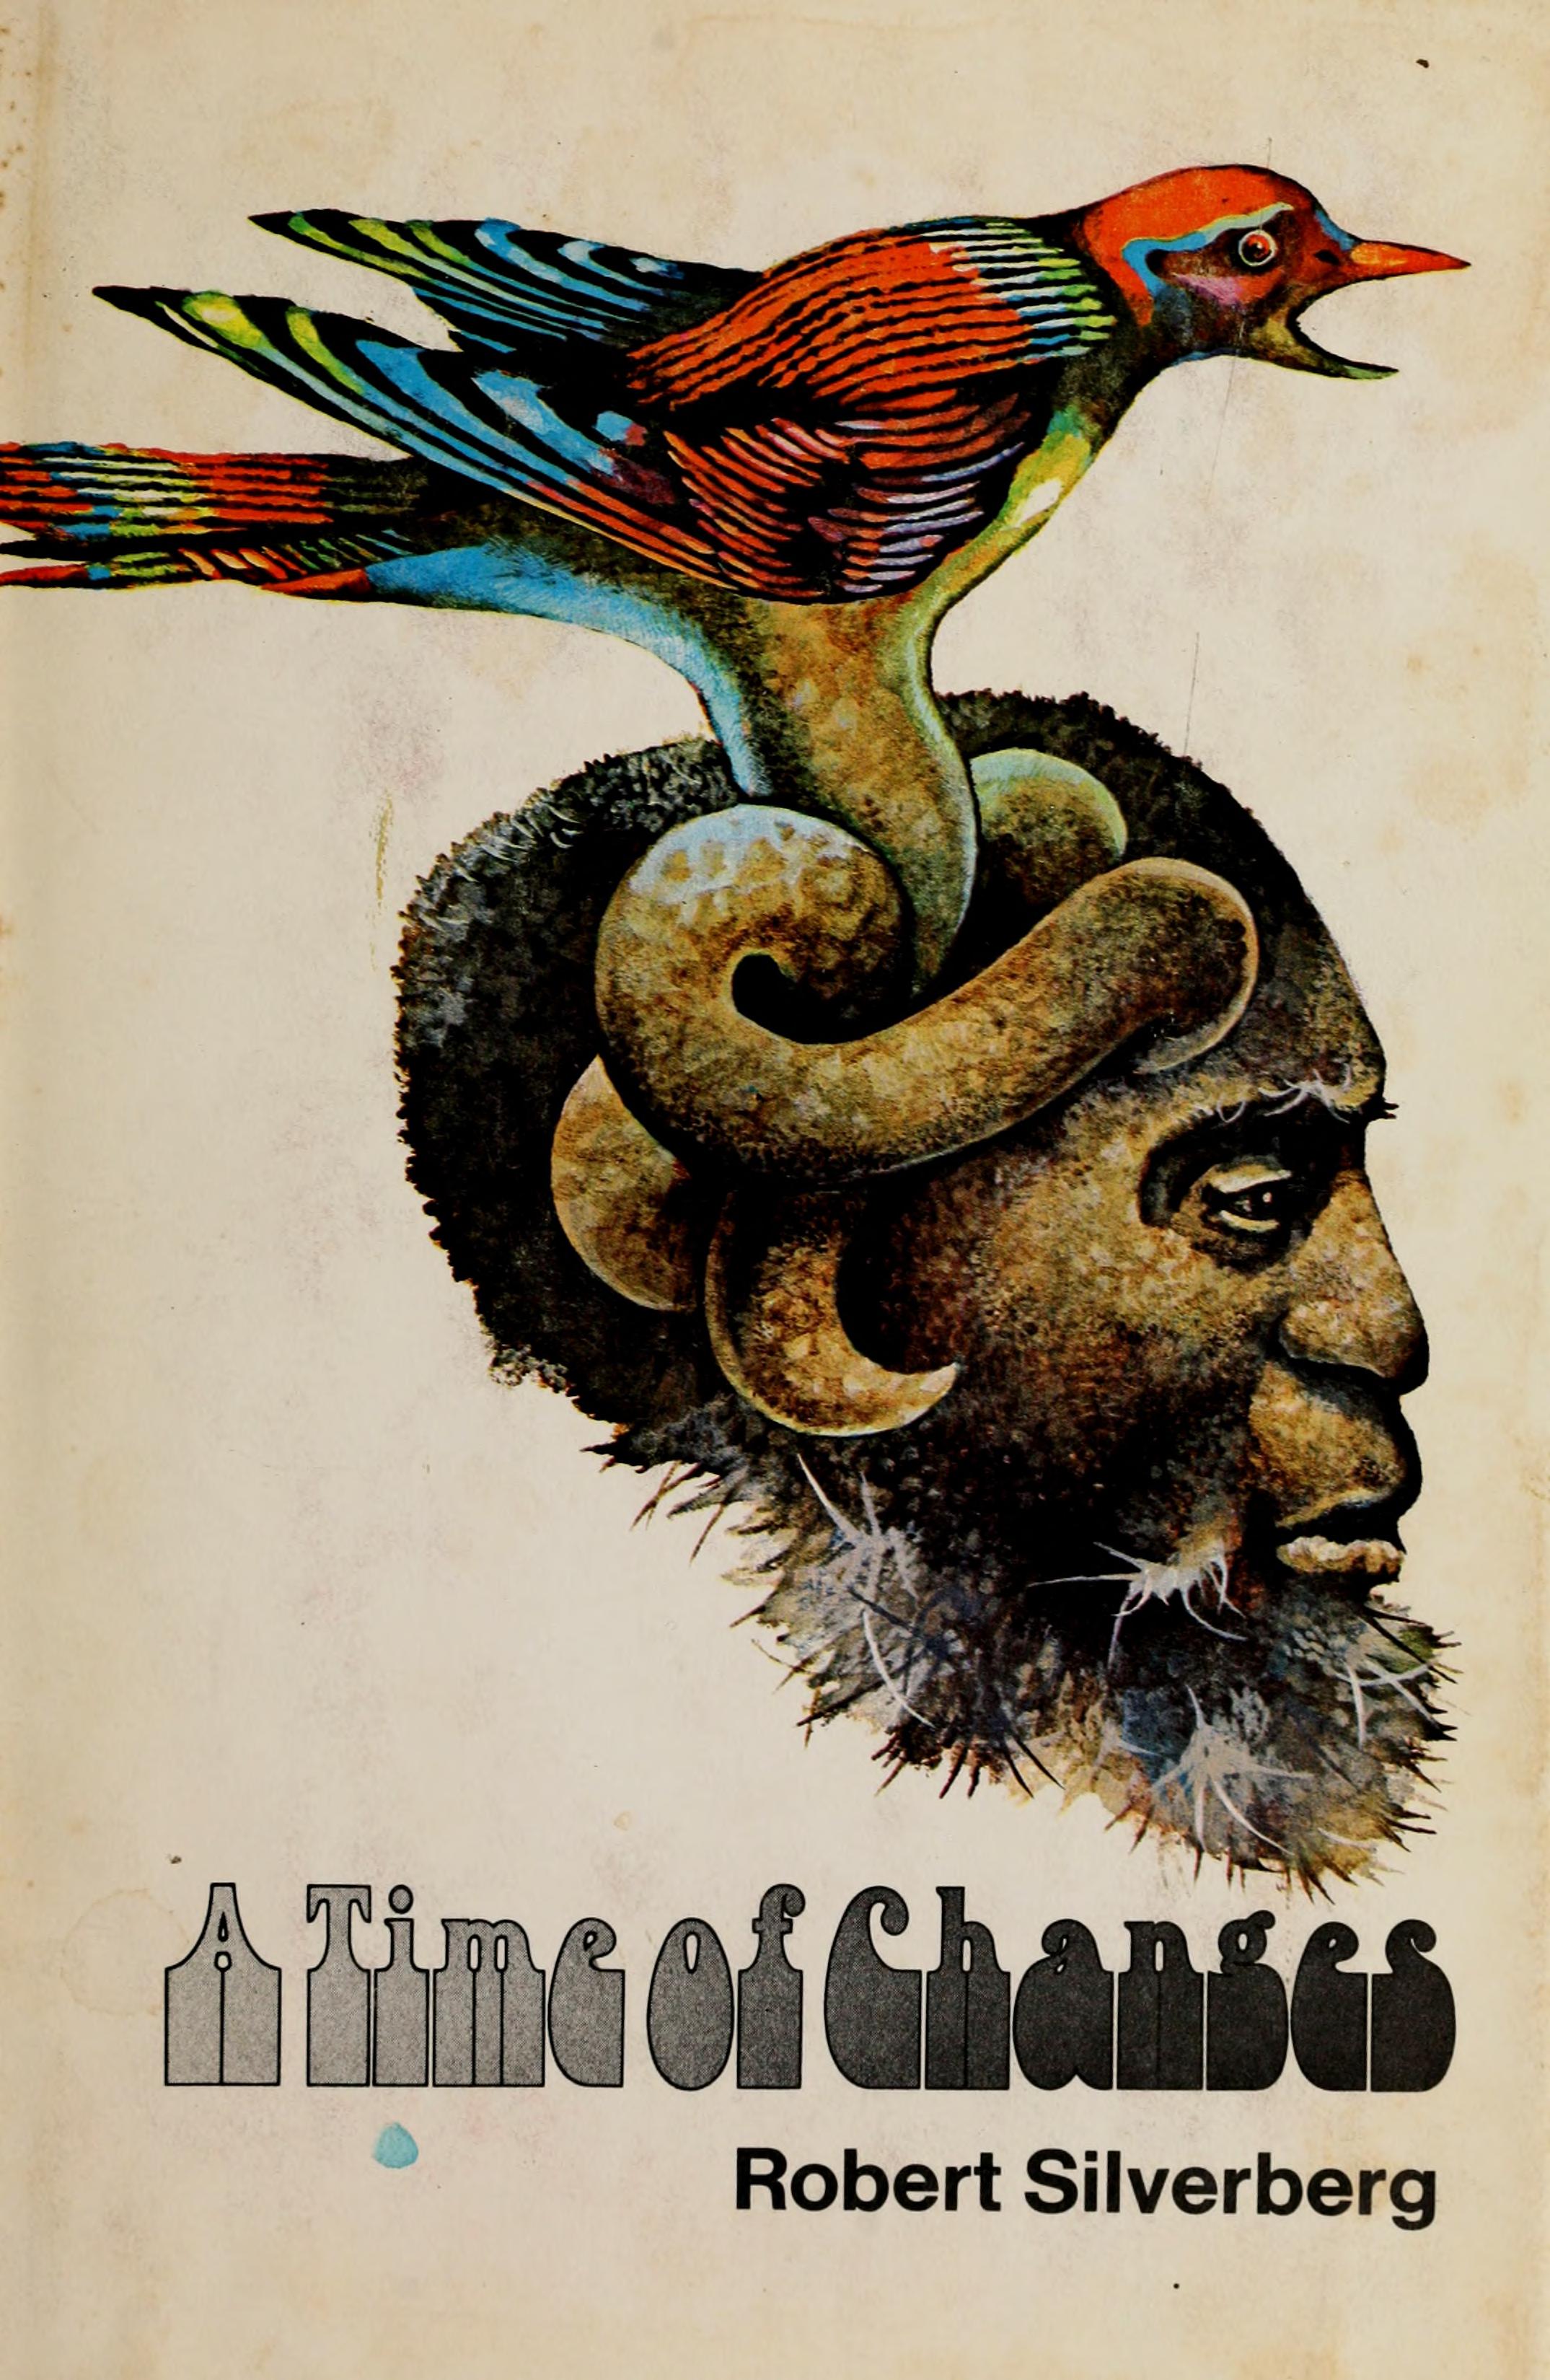 Robert Silverberg: A Time of Changes (Hardcover, 1971, Nelson Doubleday)